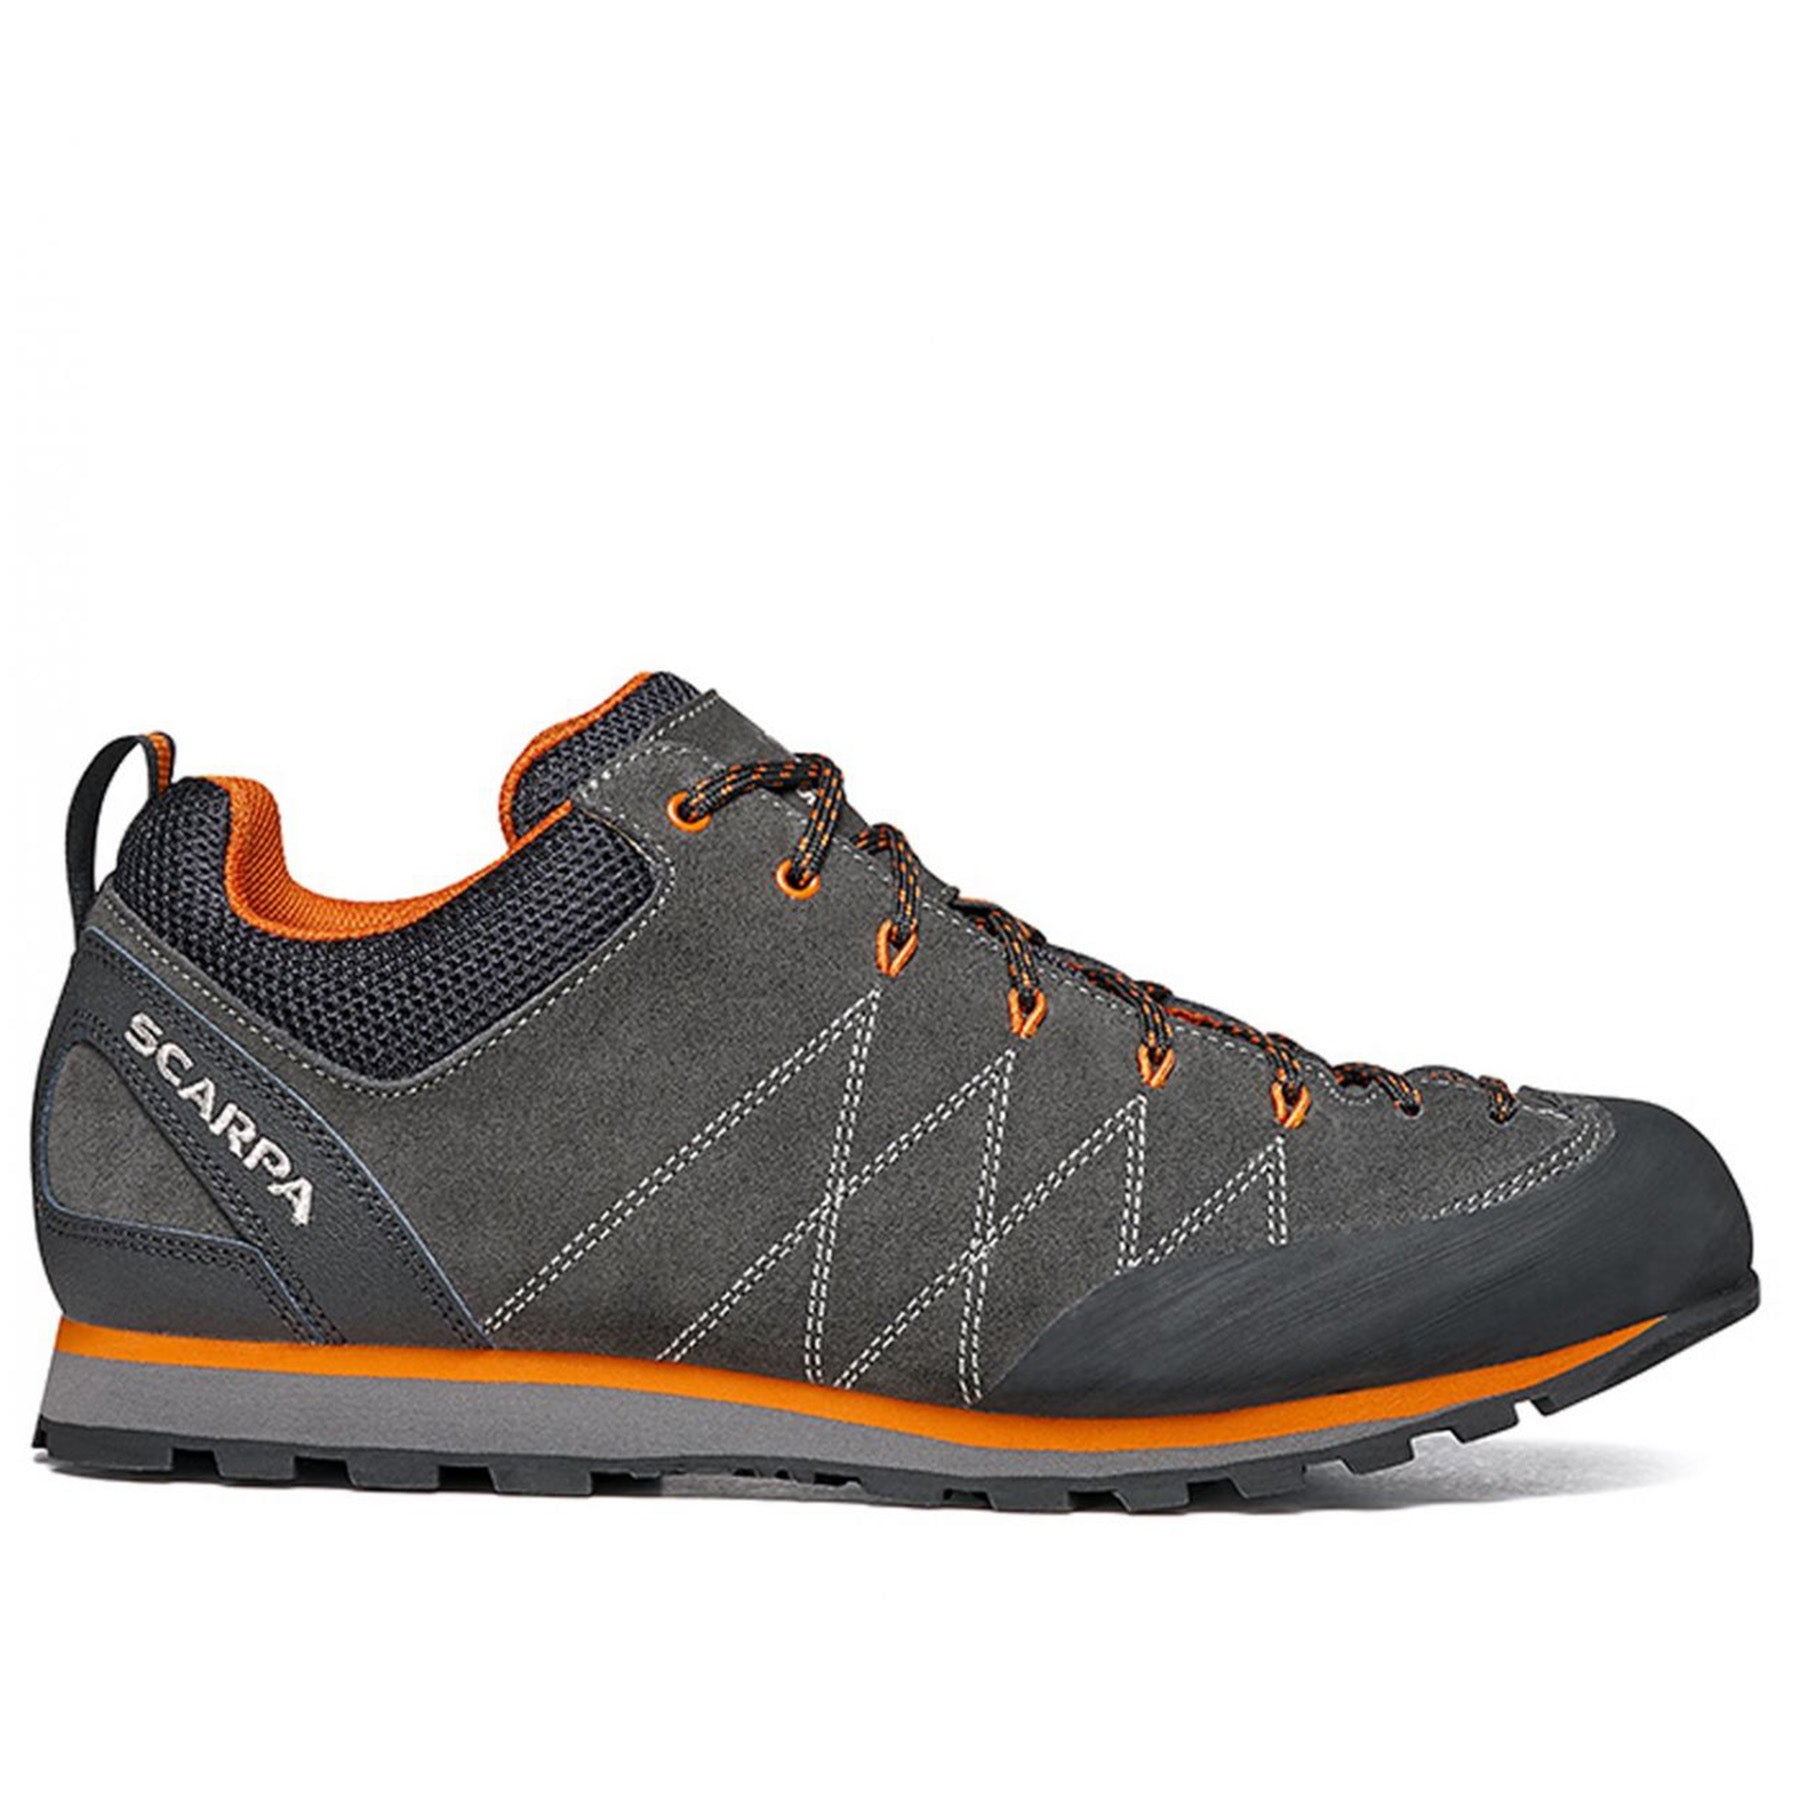 side view of the men's crux approach shoe in shark grey